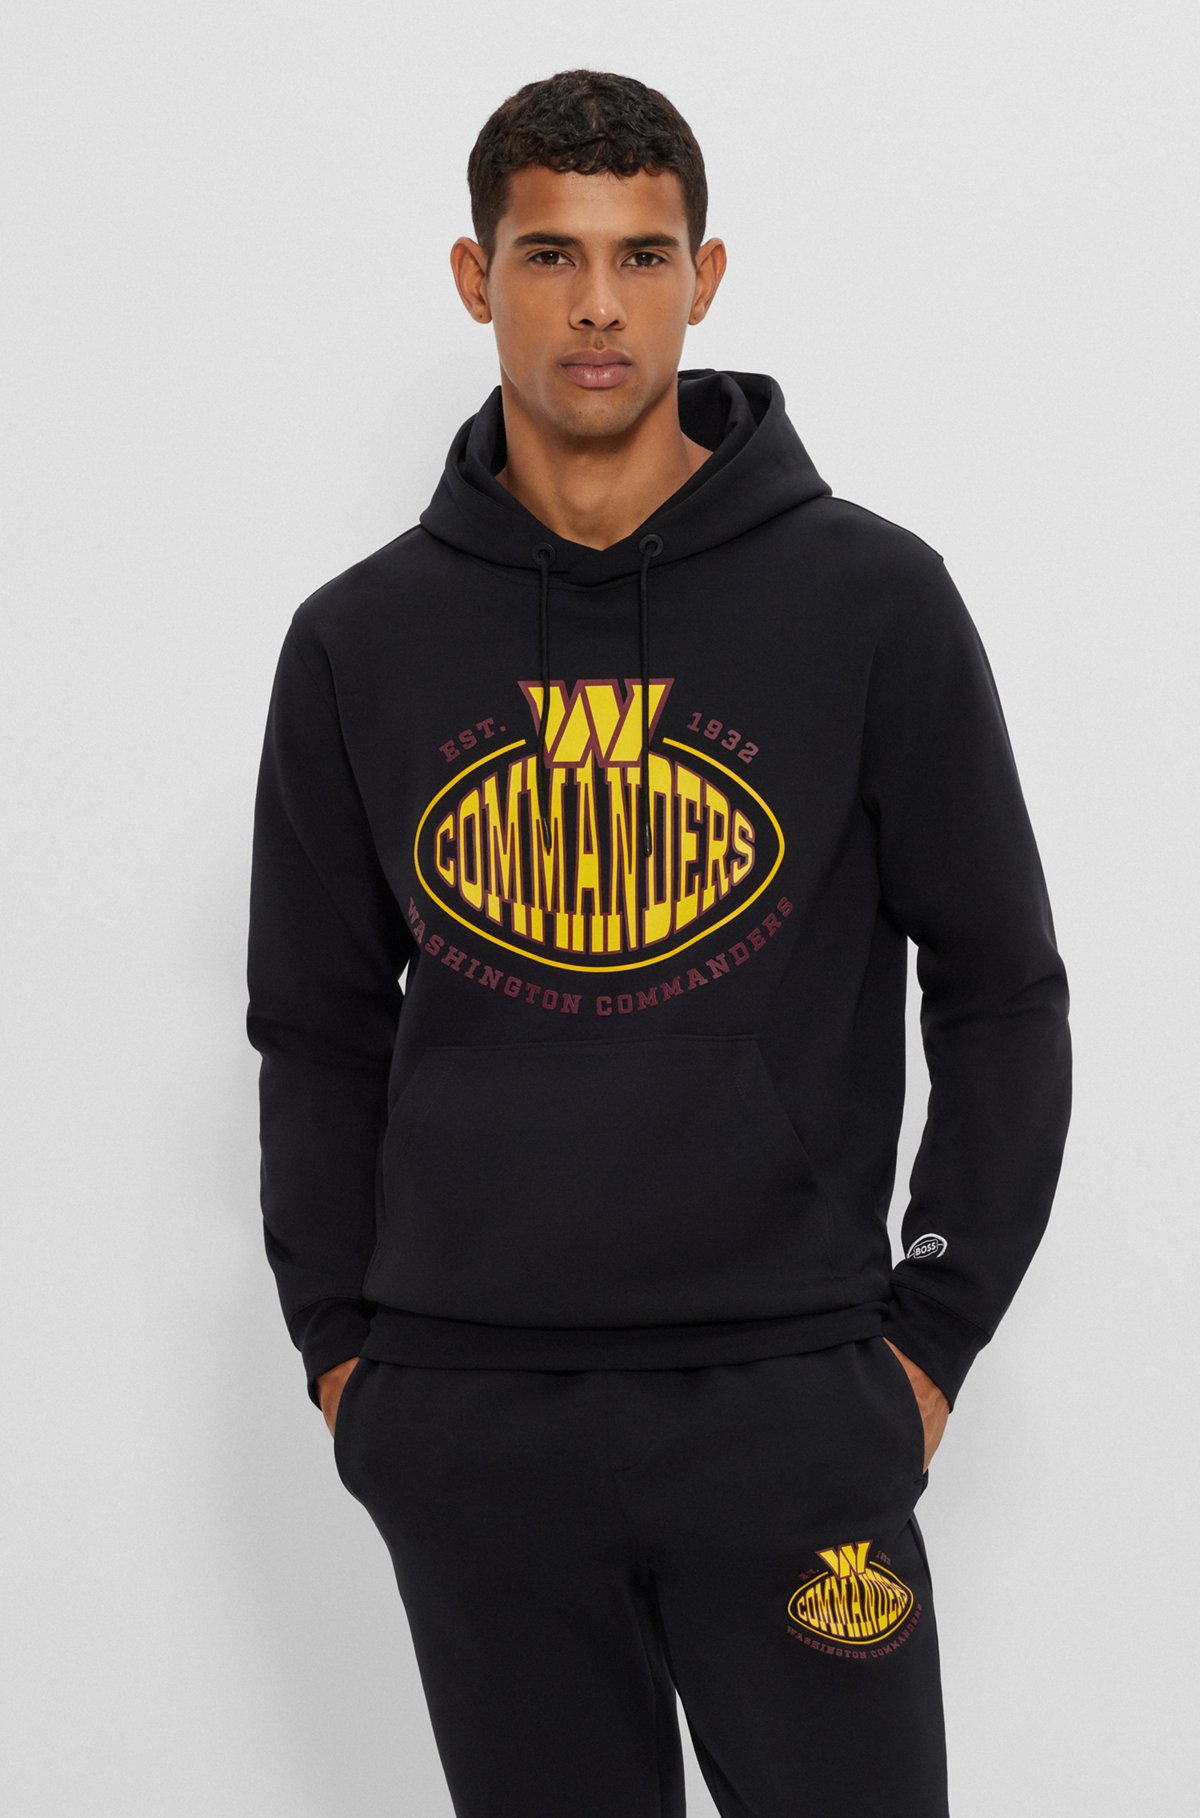  BOSS x NFL cotton-blend hoodie with collaborative branding, Commanders